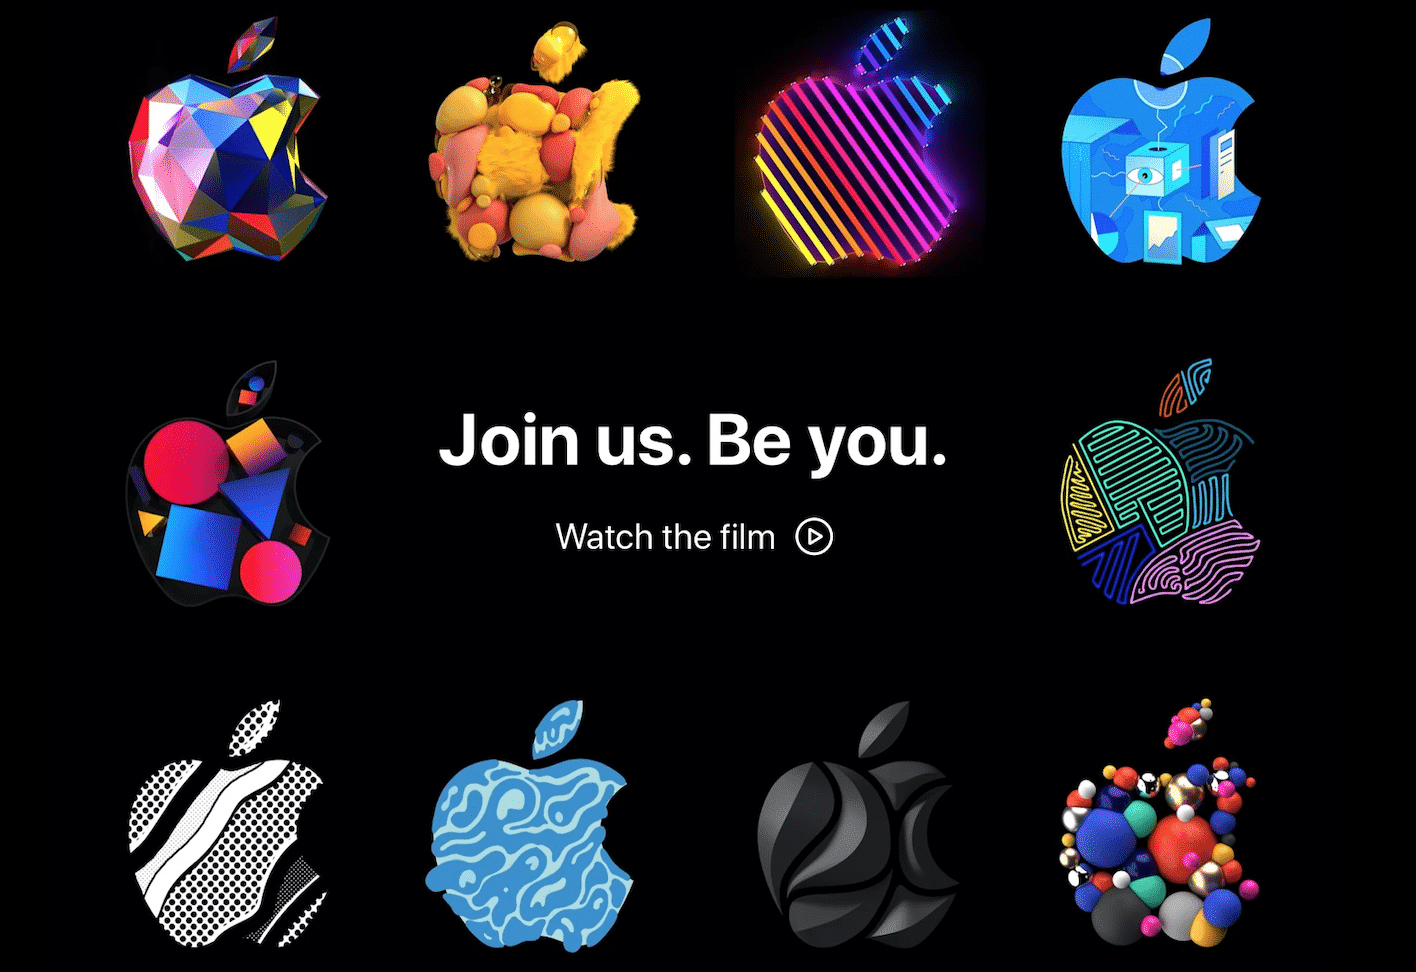 Apple Jobs Website Updated with Animated Logos and New Design